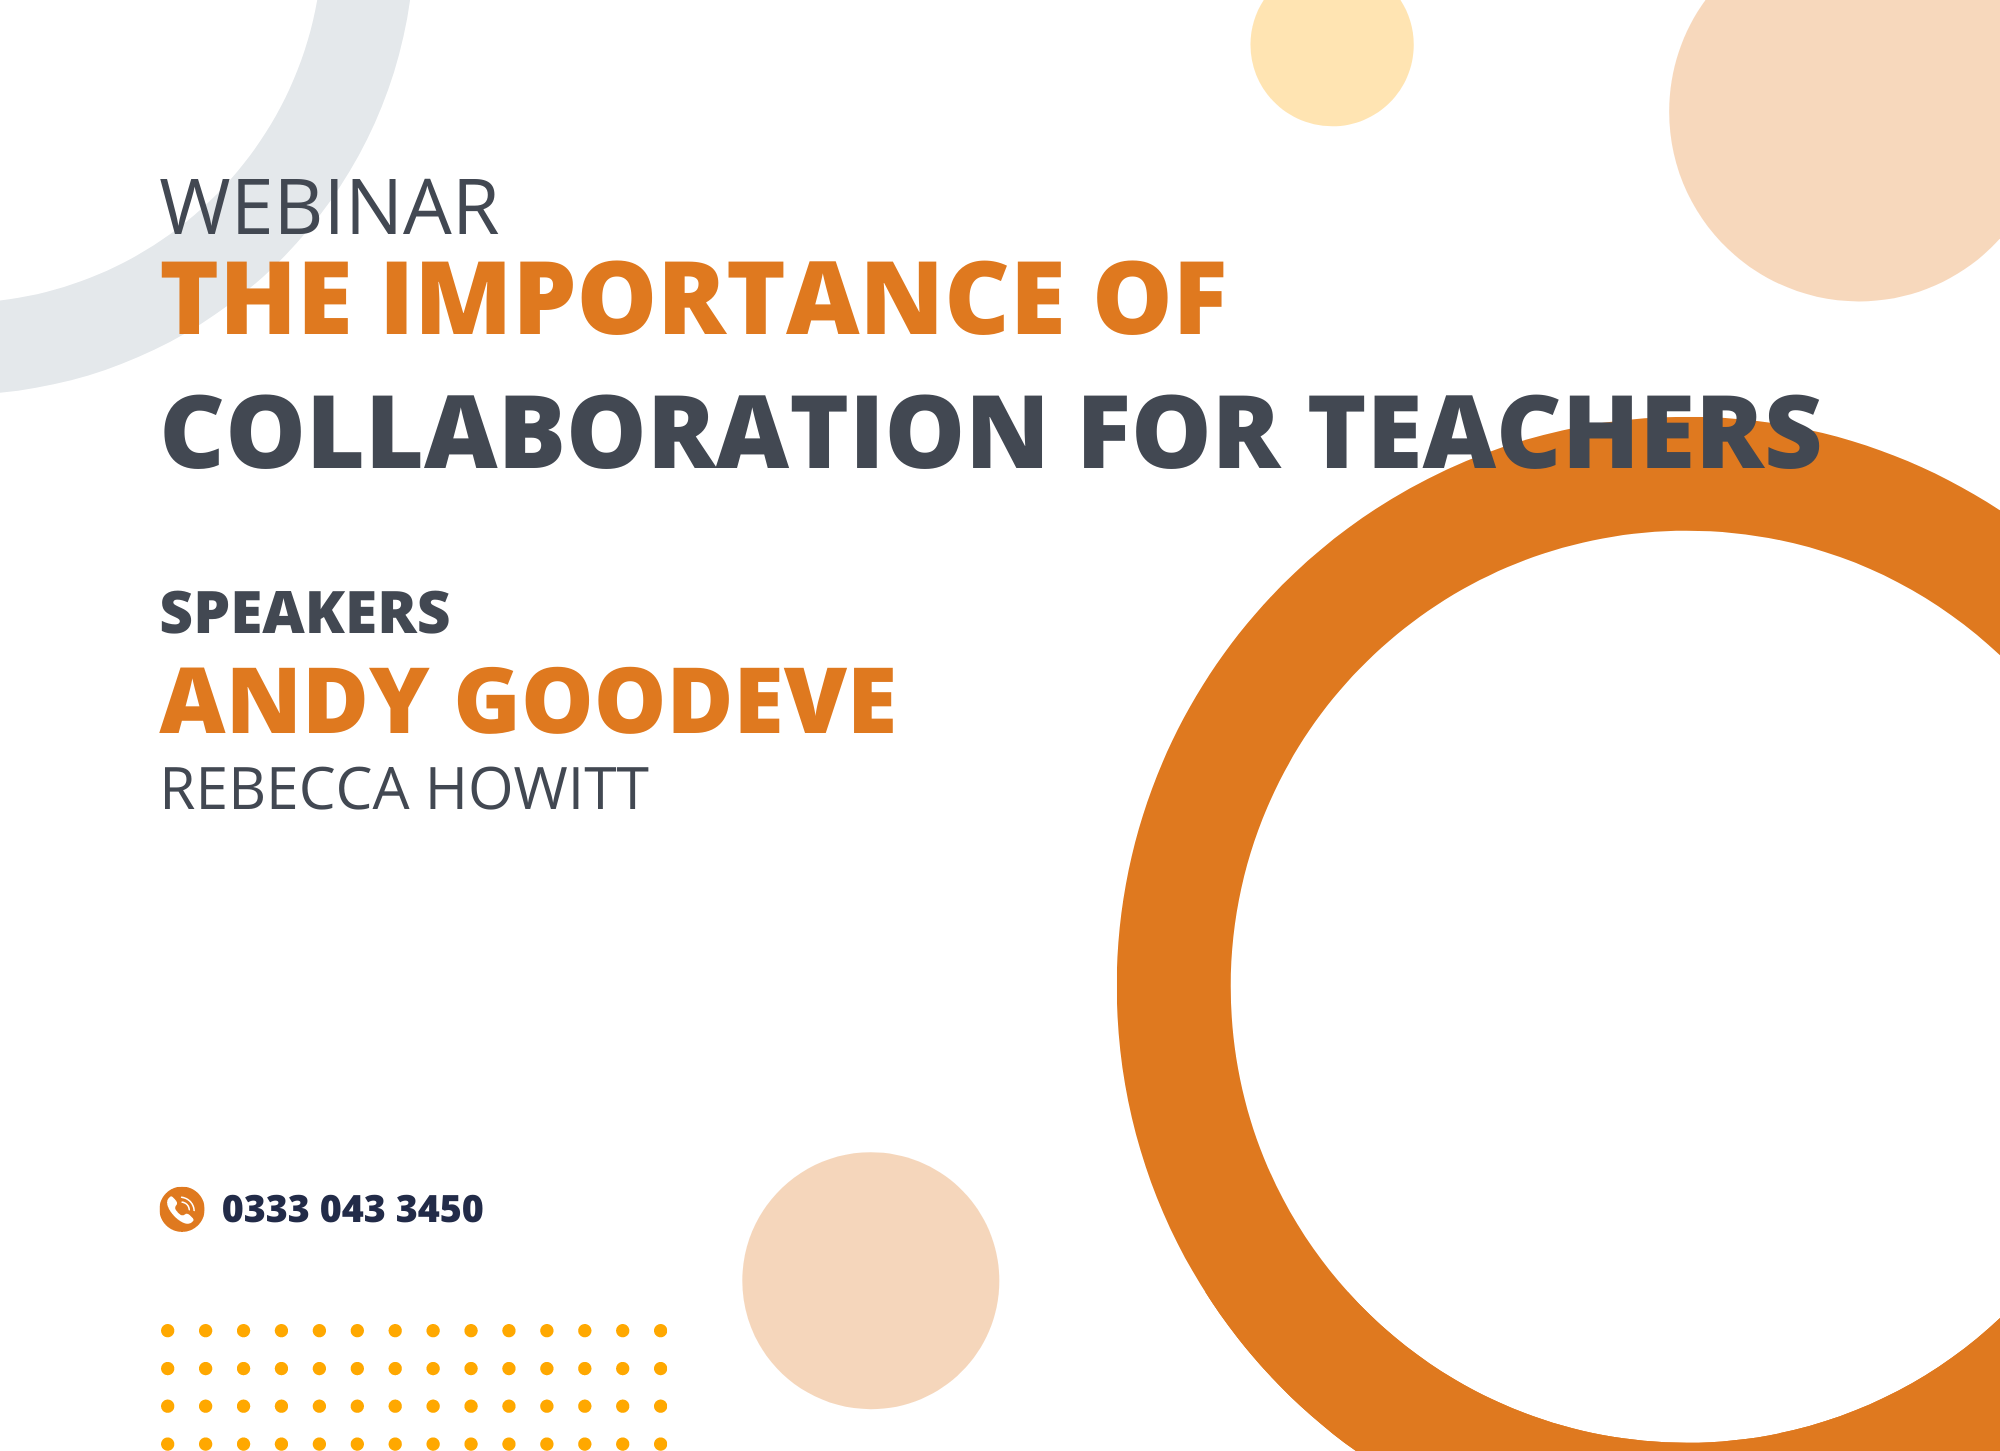 The importance of collaboration for teachers and effective use of iP